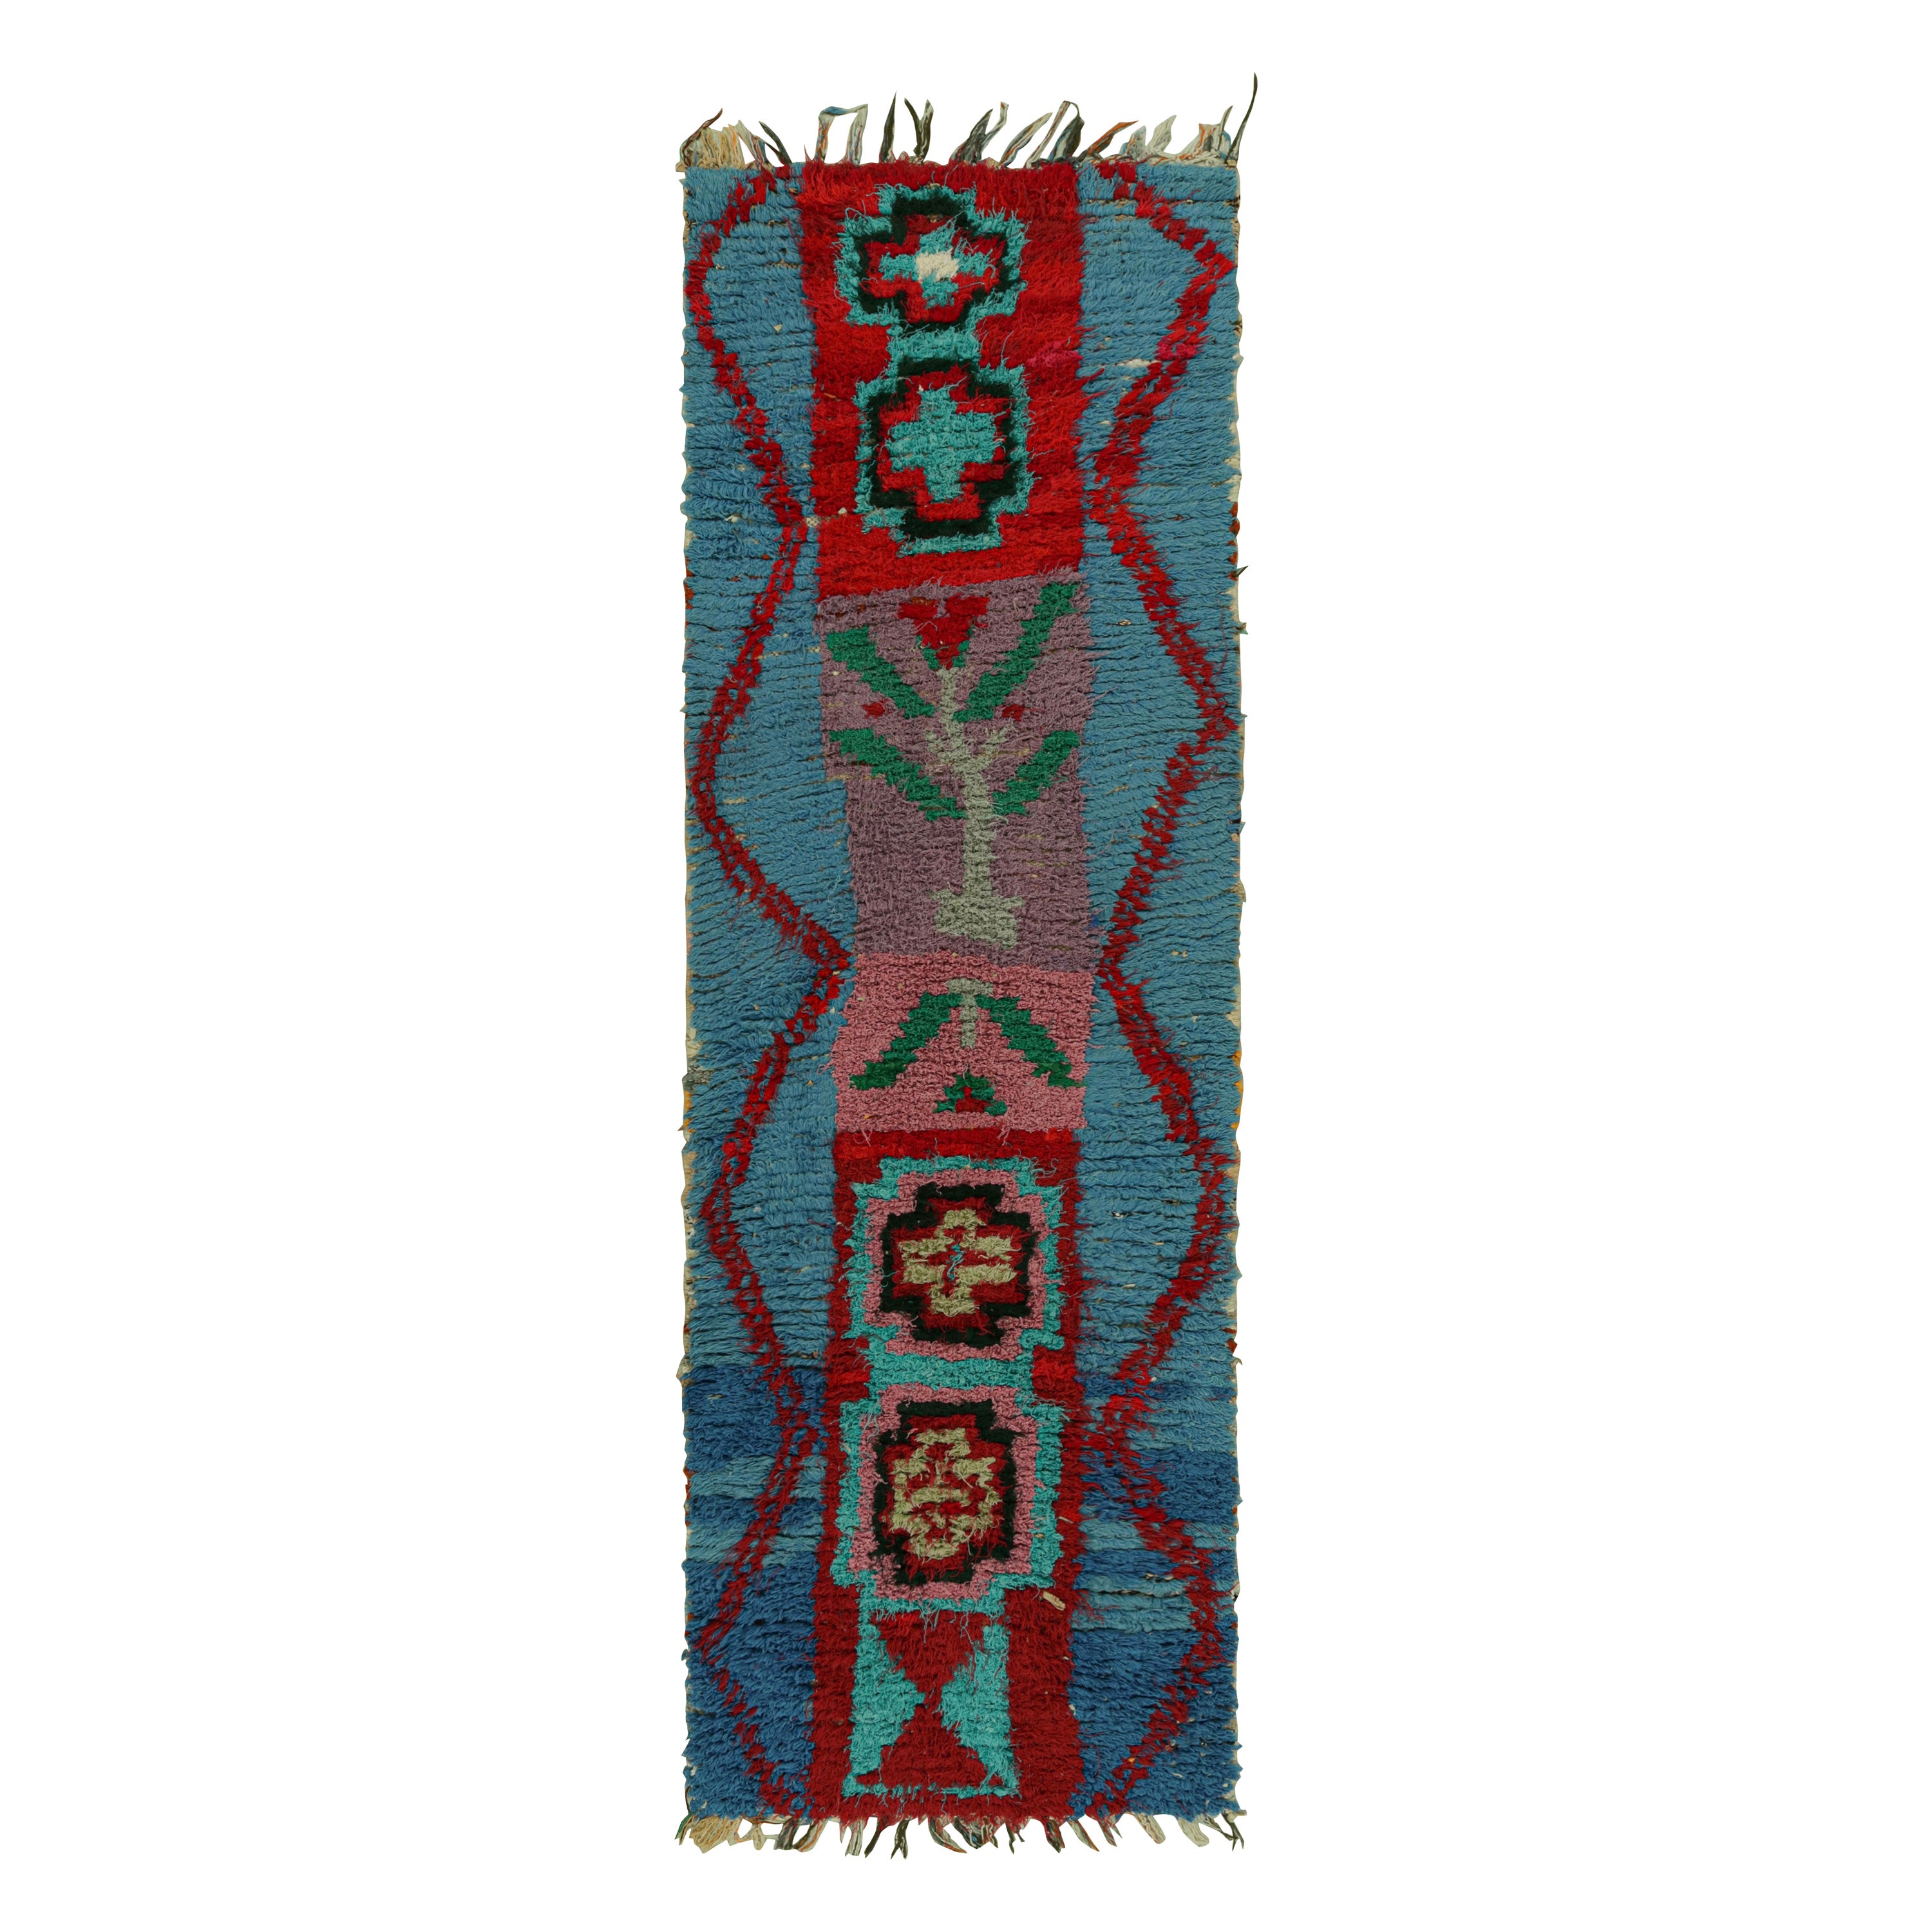 Vintage Moroccan Runner Rug in Blue with Geometric Patterns, from Rug & Kilim 